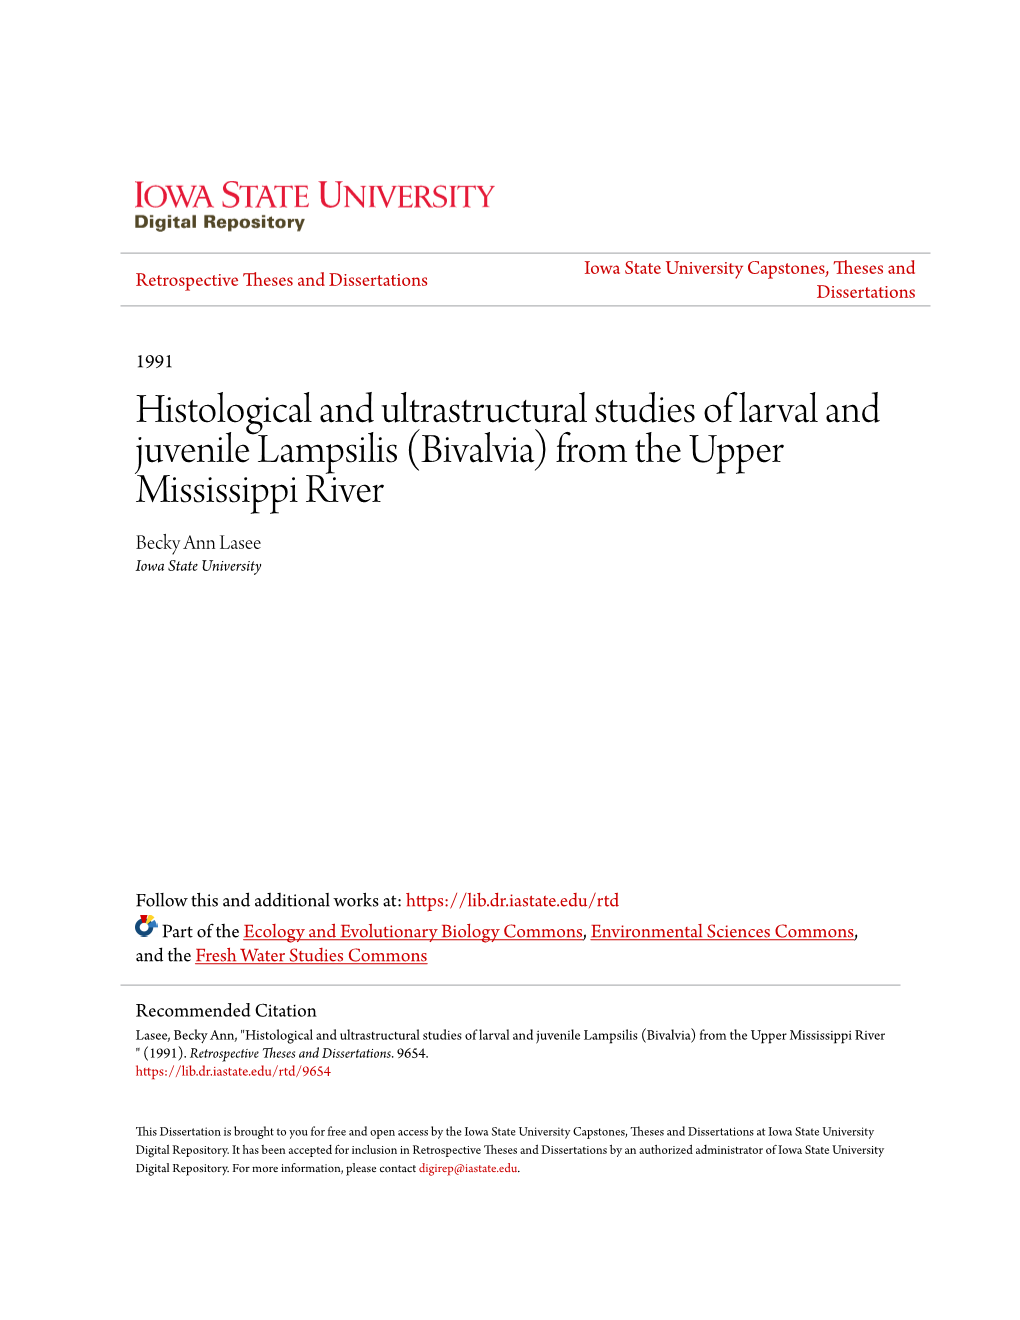 Histological and Ultrastructural Studies of Larval and Juvenile Lampsilis (Bivalvia) from the Upper Mississippi River Becky Ann Lasee Iowa State University